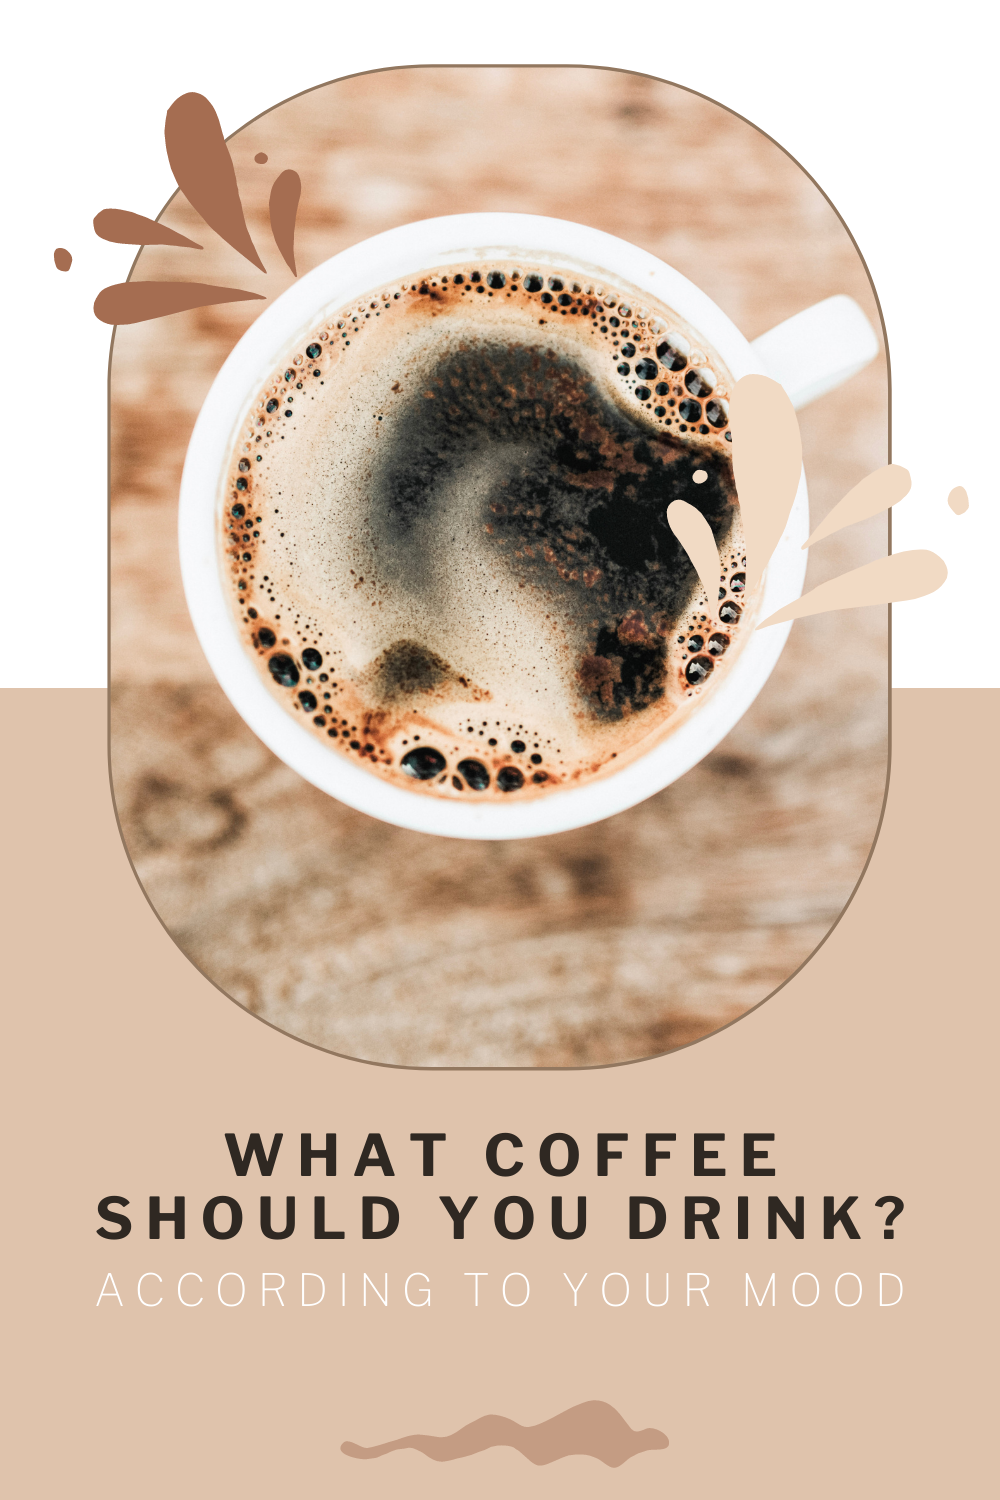 A top view of a freshly brewed cup of black coffee. This article covers what coffee you should drink based on your mood.